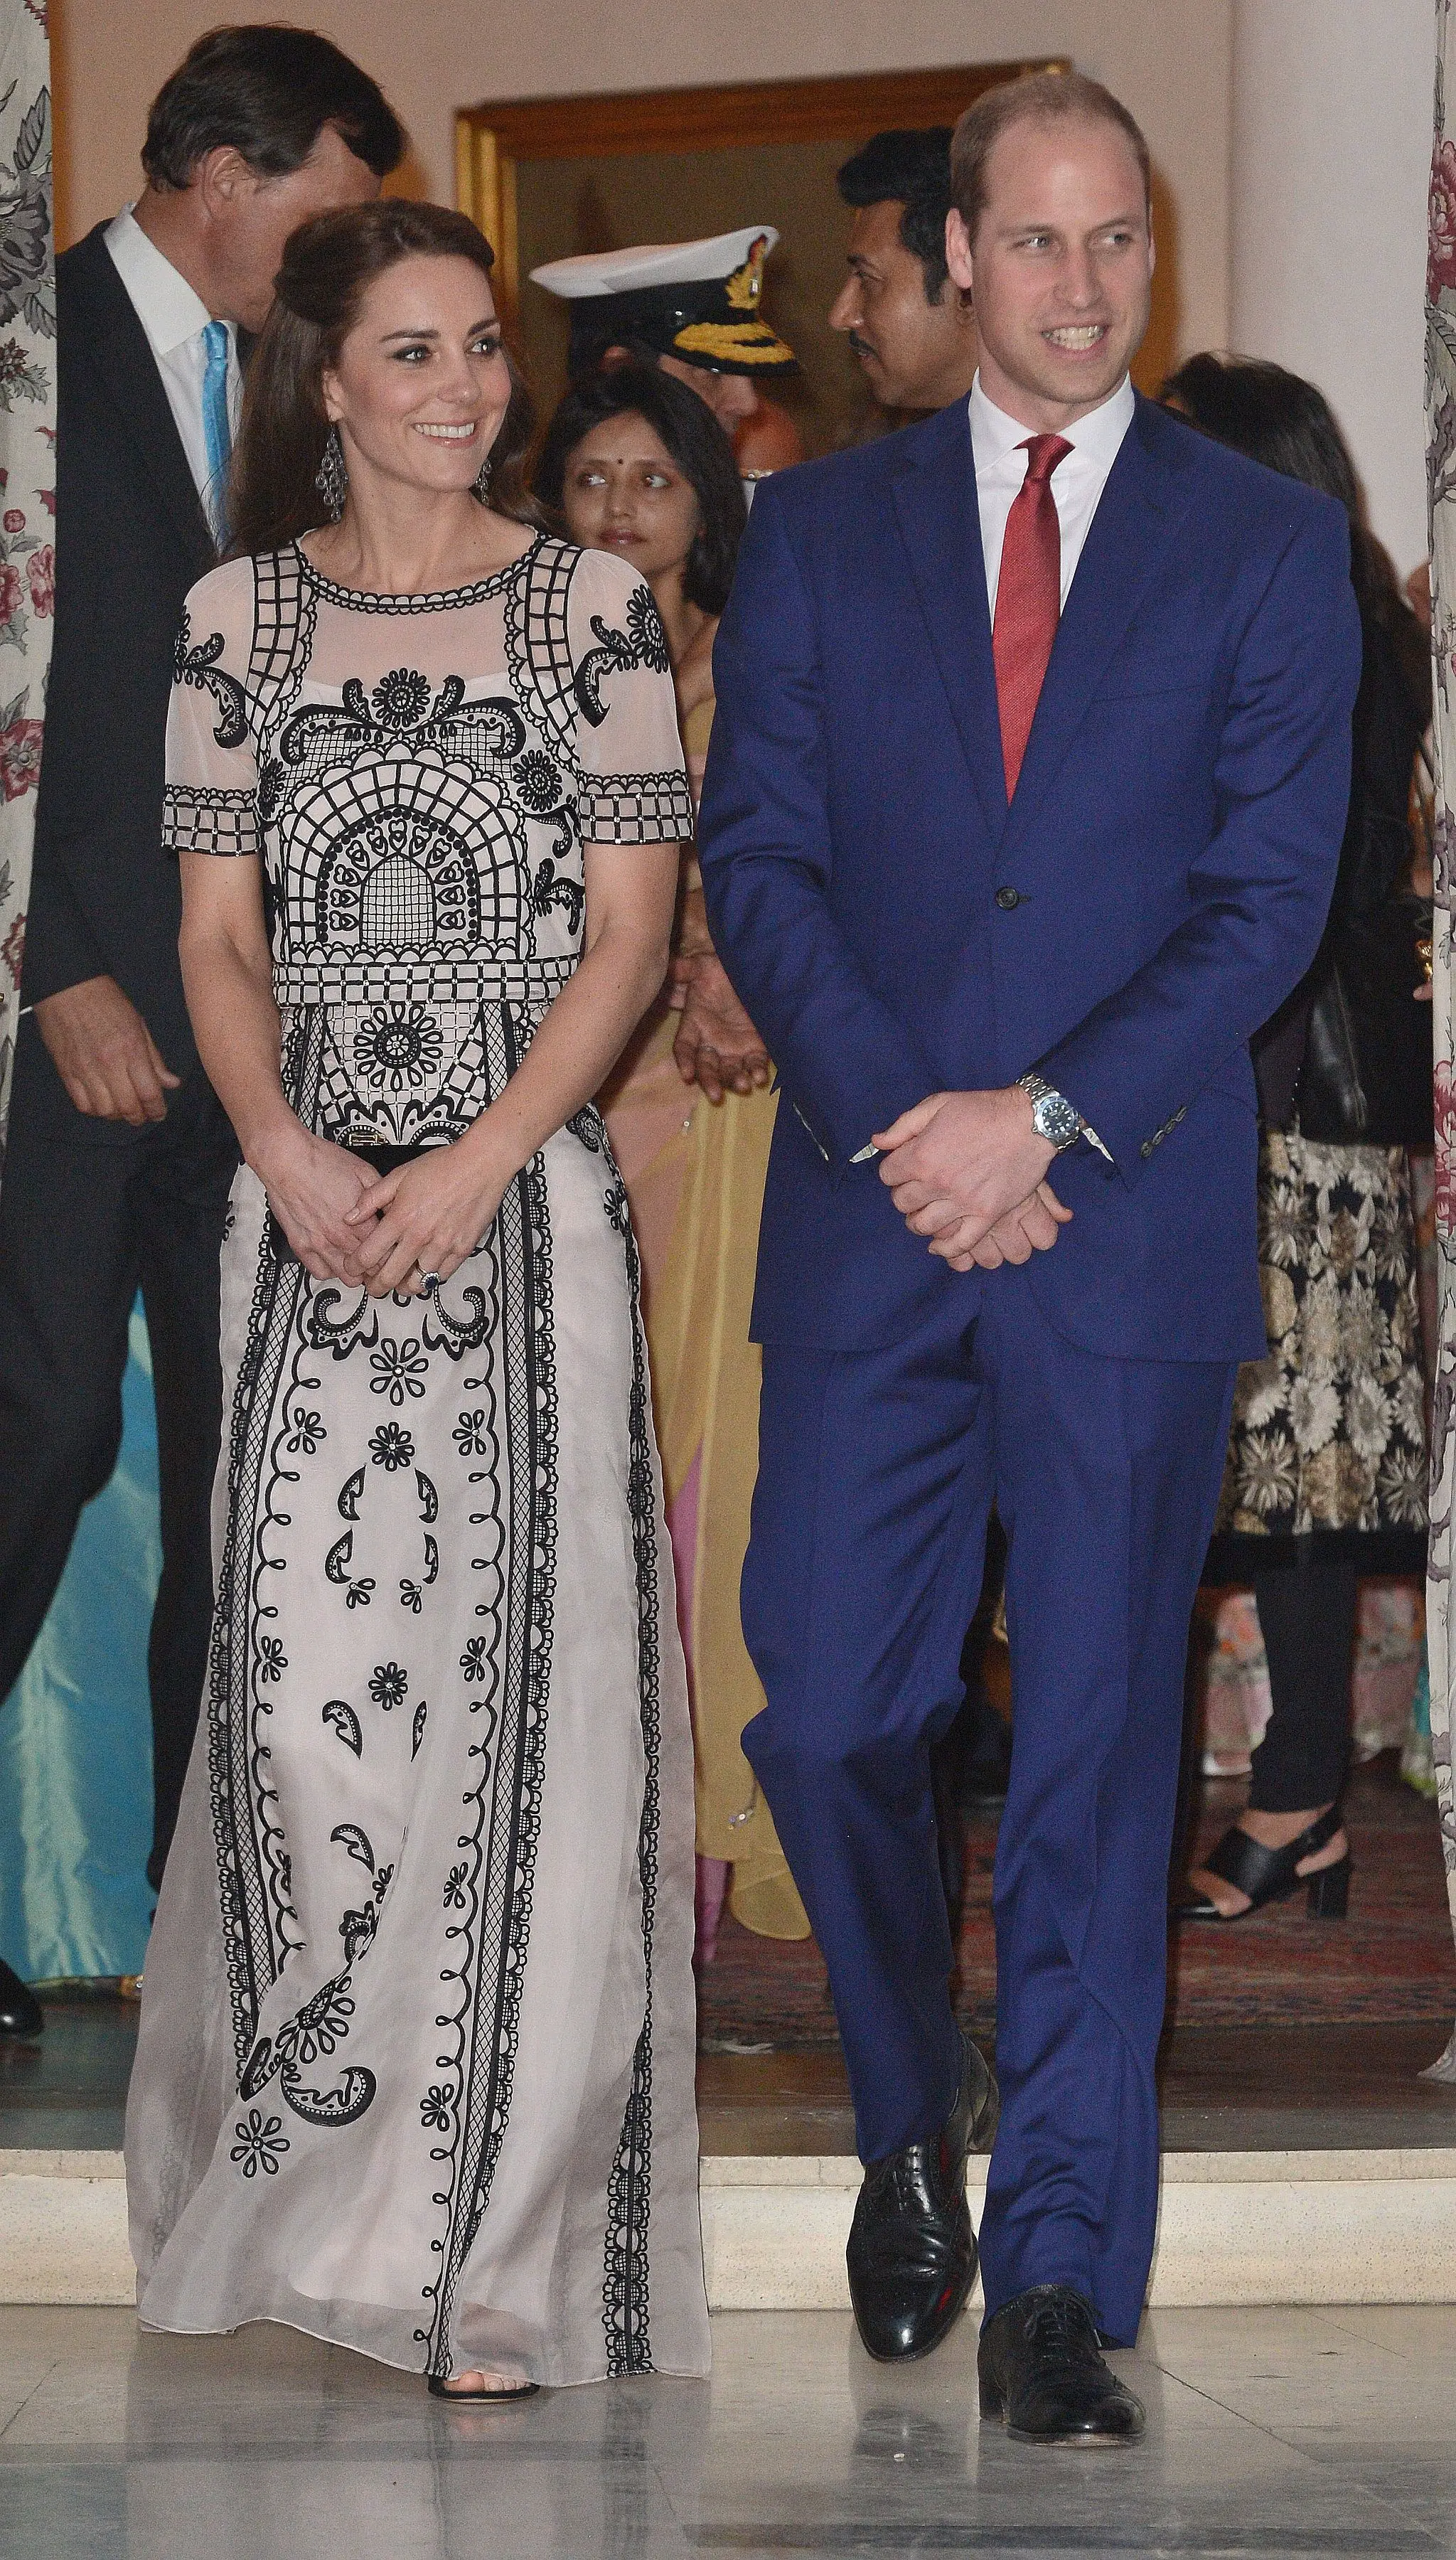 Duke and Duchess of Cambridge in India durign garden party Catherine wearing Temperley London Delphia Top and Skirt